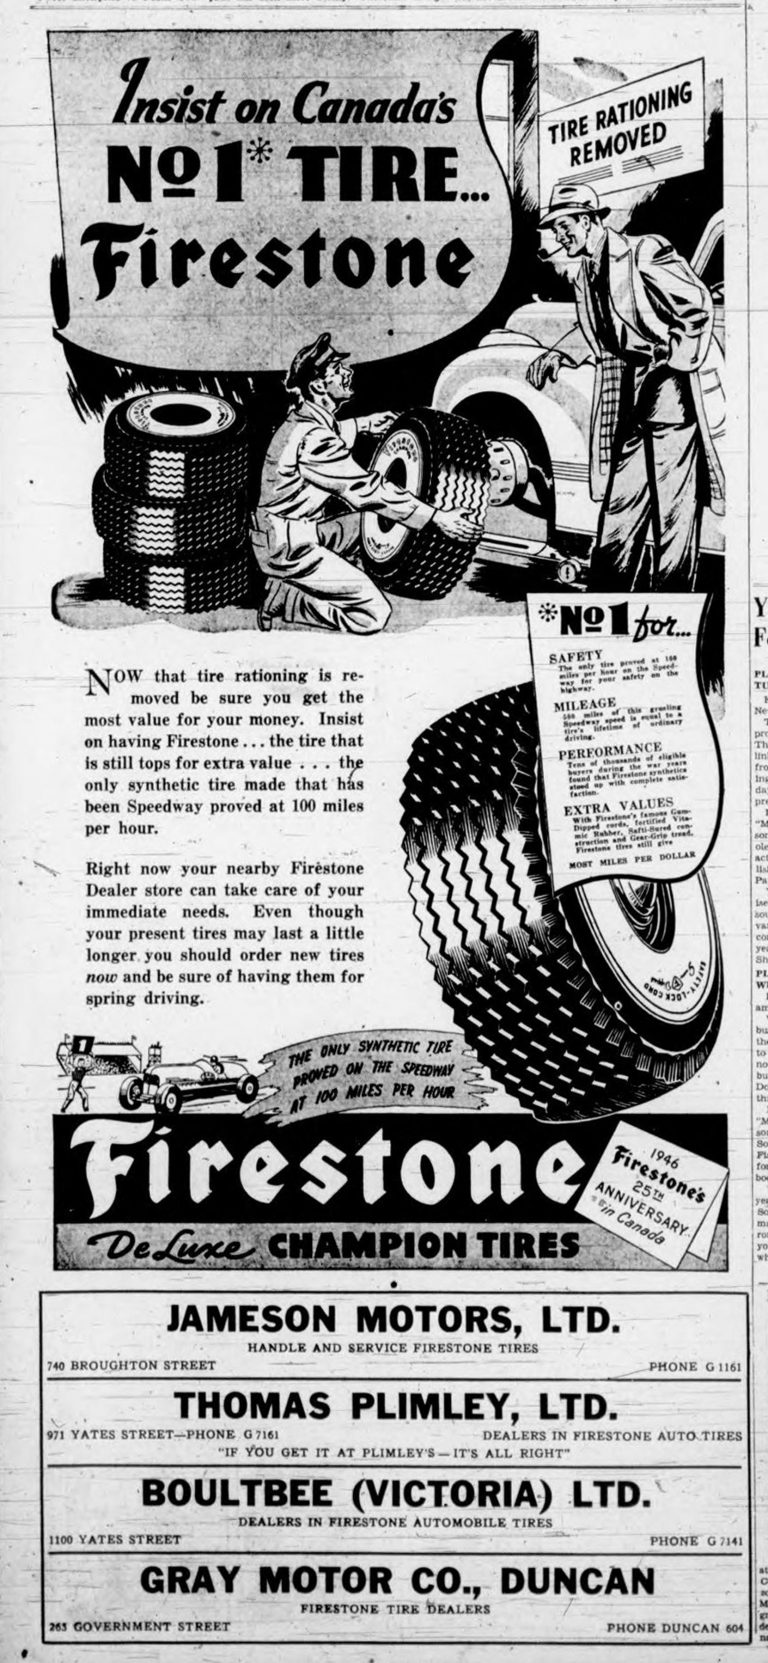 A 1946 Victoria newspaper advertisement for Firestone tires. Note the "Tire Rationing Removed" in the upper right corner; tires had been rationed during World War II.